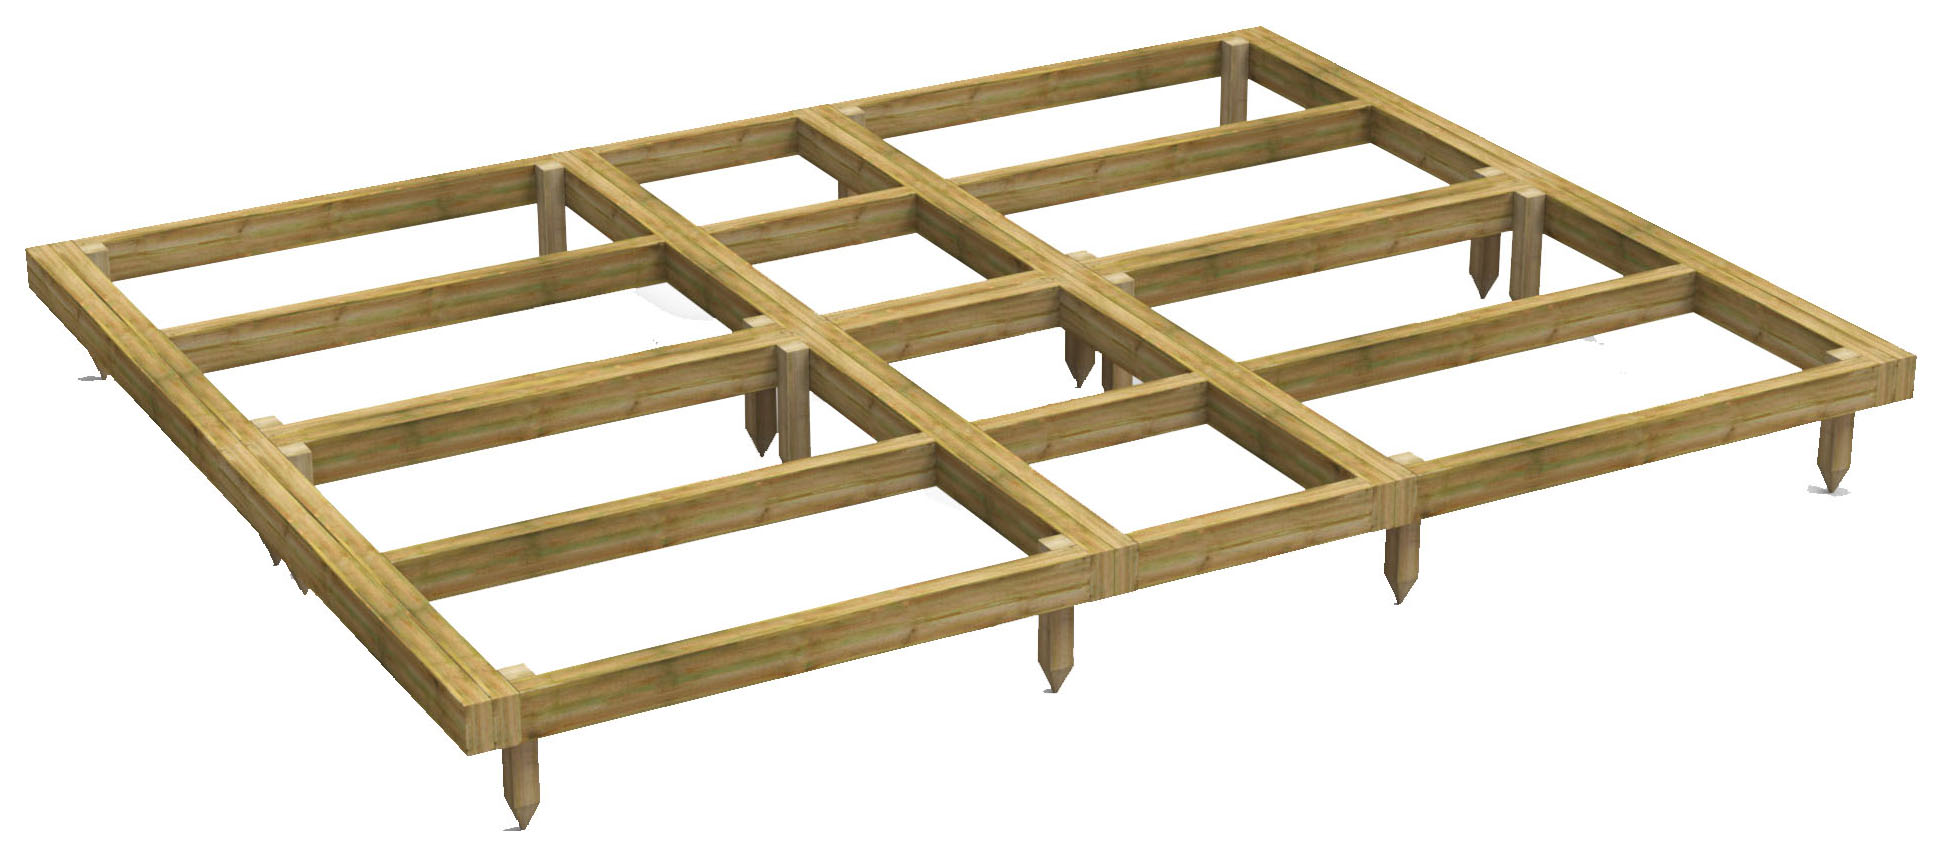 Power Sheds Pressure Treated Garden Building Base Kit - 10 x 8ft